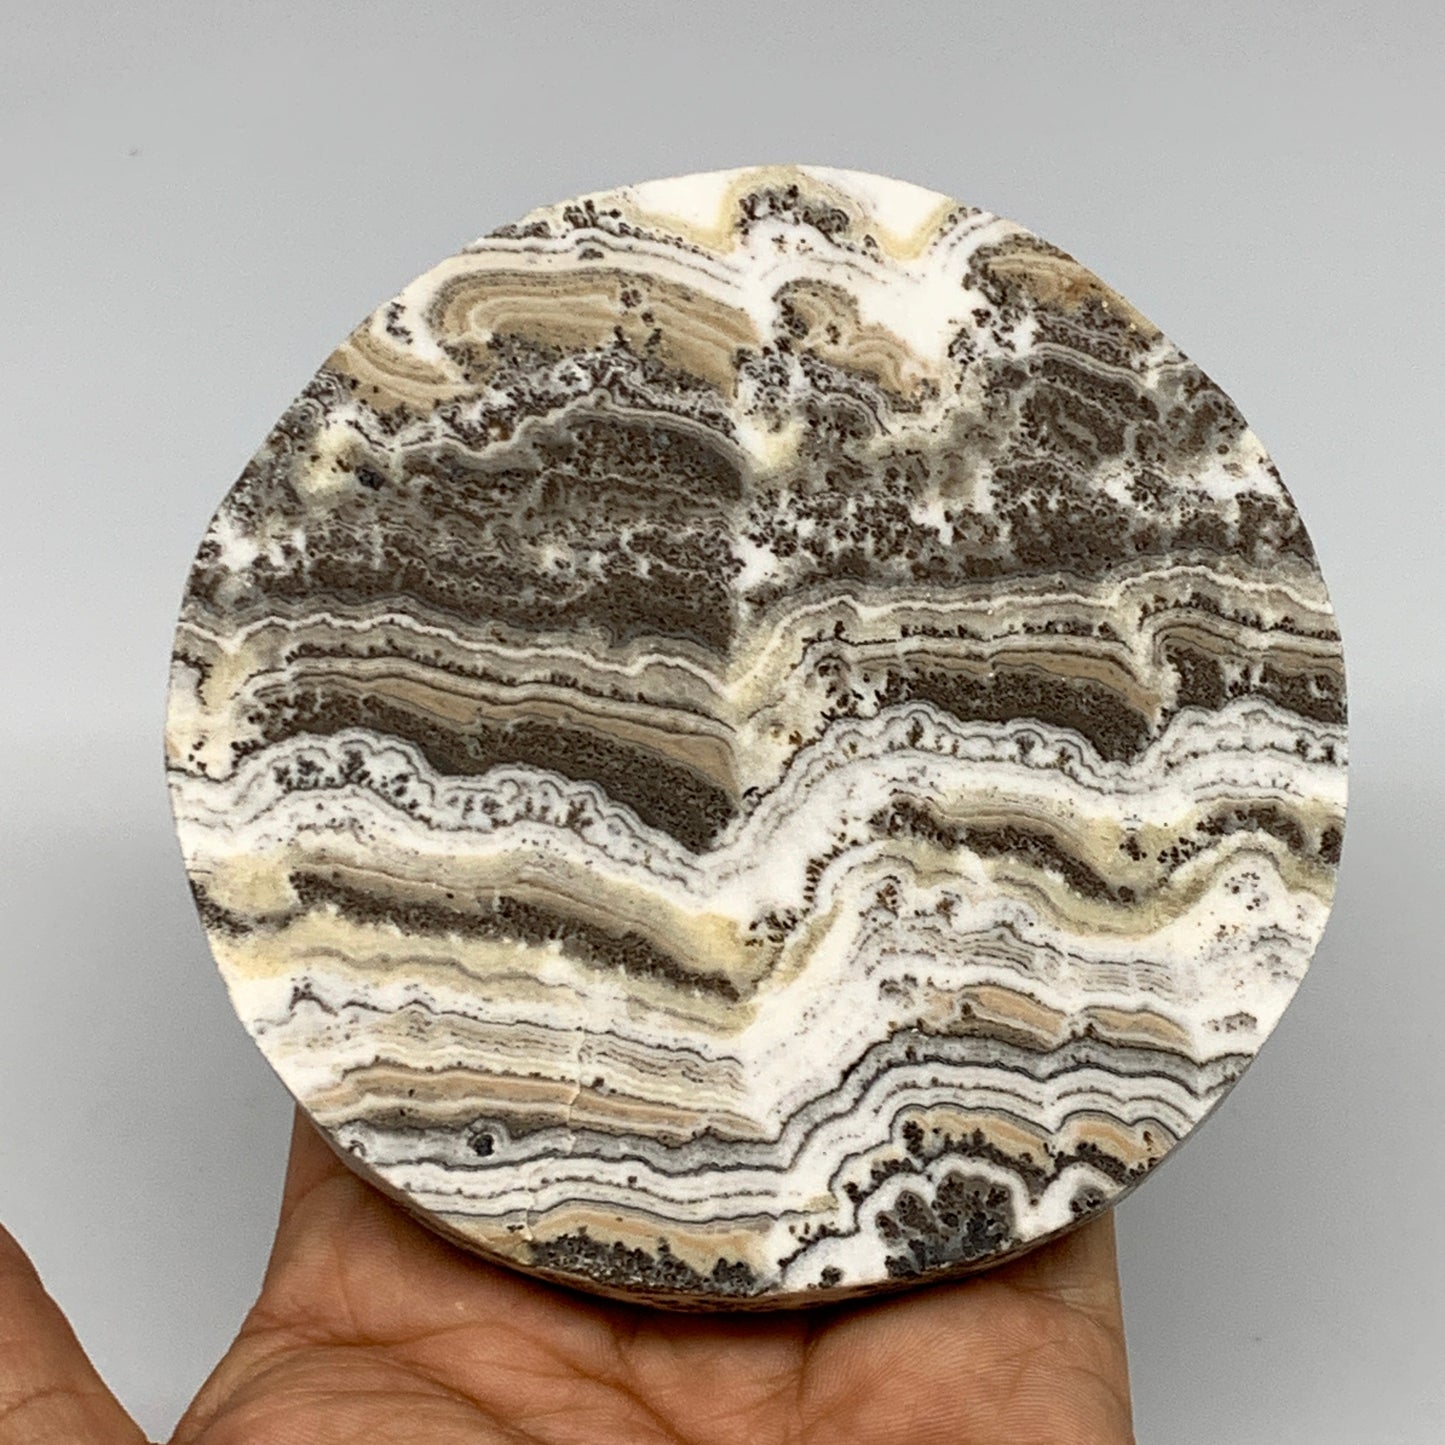 312.9g, 4.1"x0.7", Natural Picture Calcite Round Disc/Coaster @Mexico, B25475